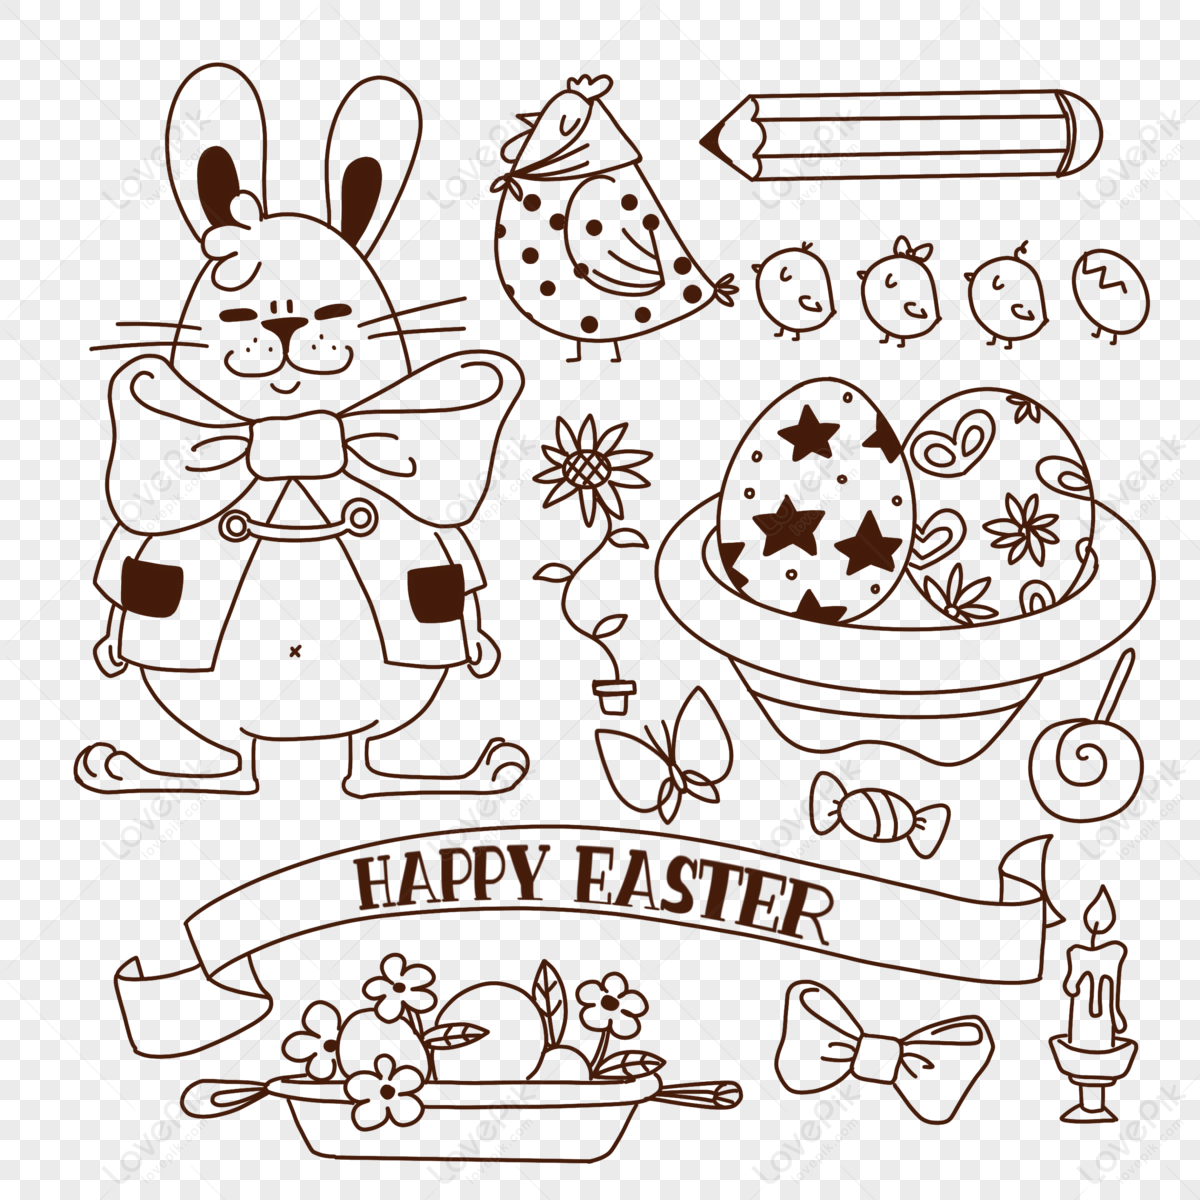 Happy Easter Bunny Drawing by Nicole Pedra - Pixels